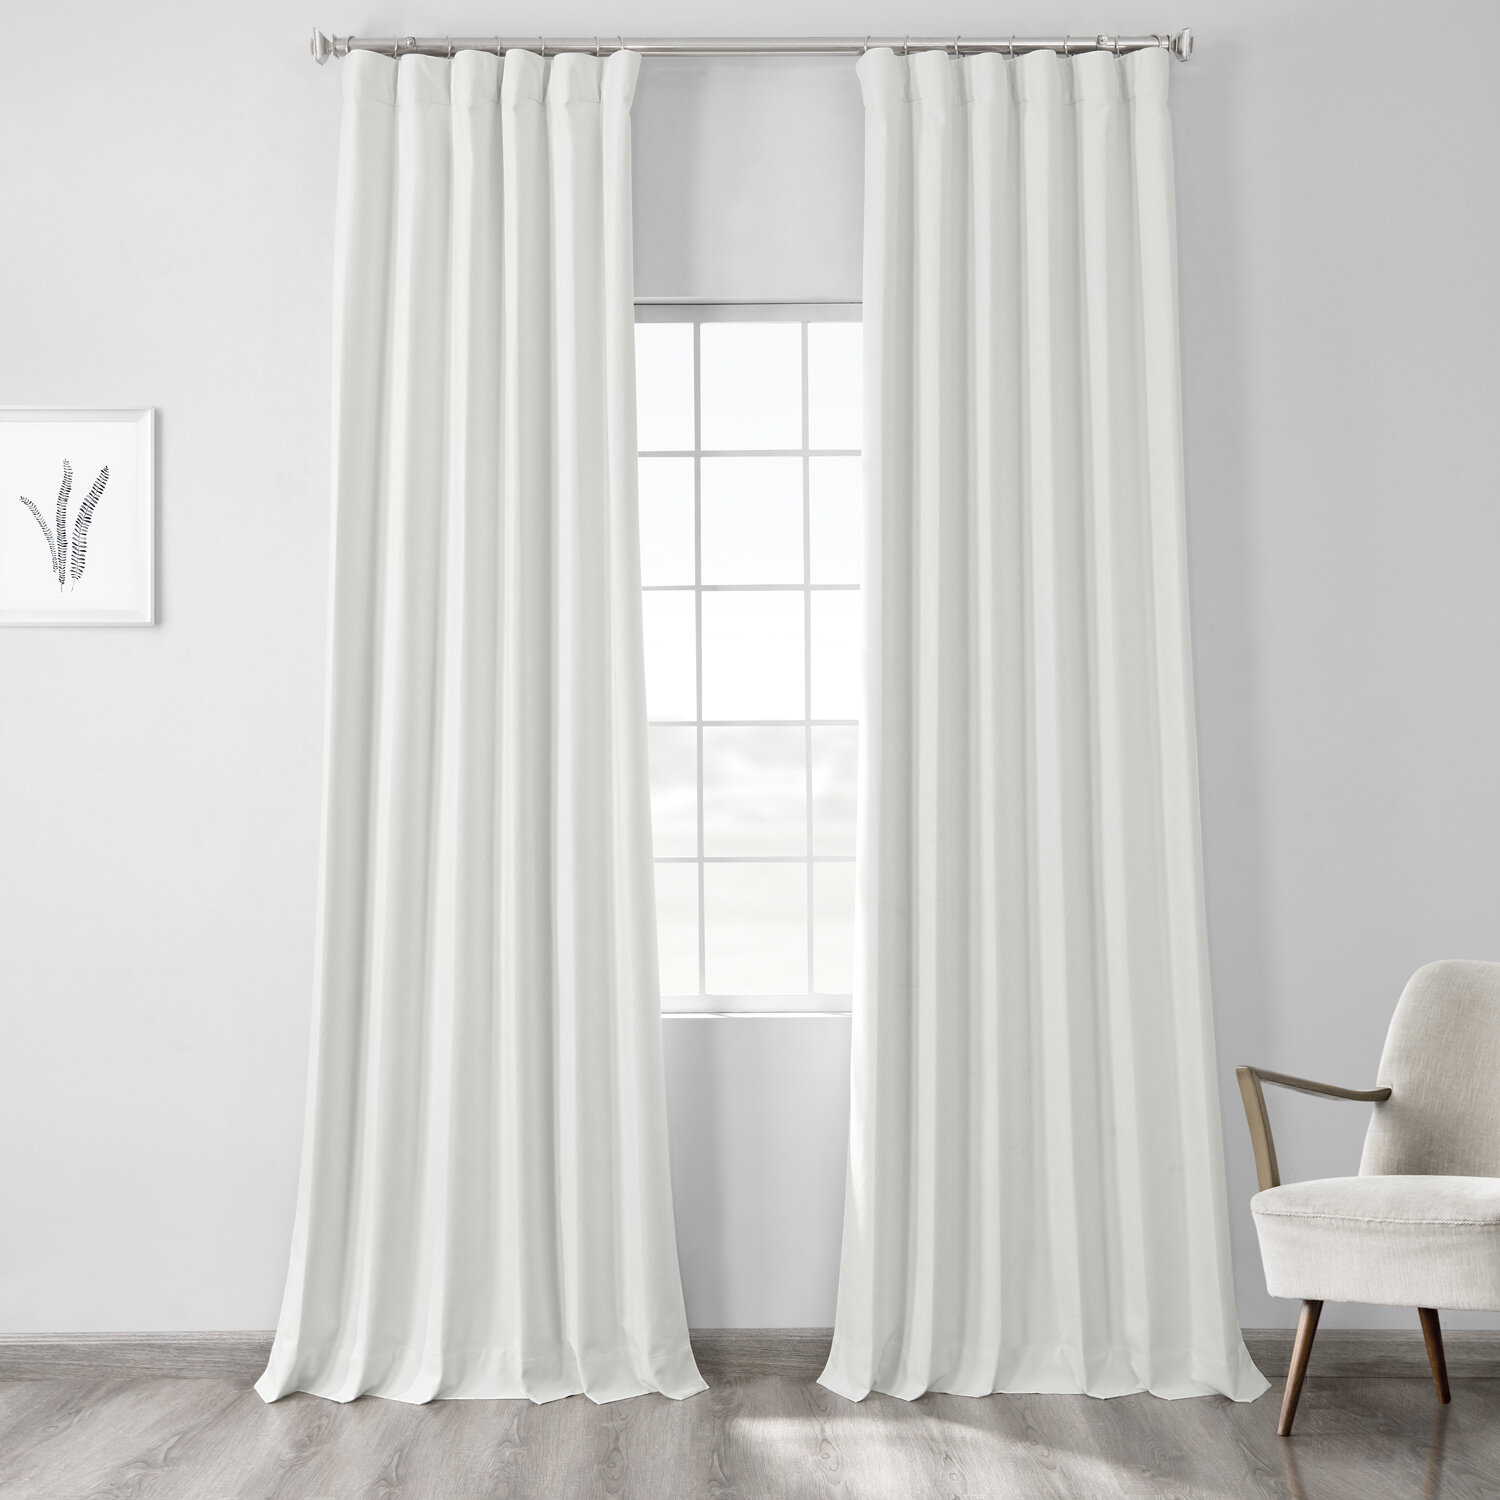 Blackout curtains — 5 reasons to buy and 4 to skip